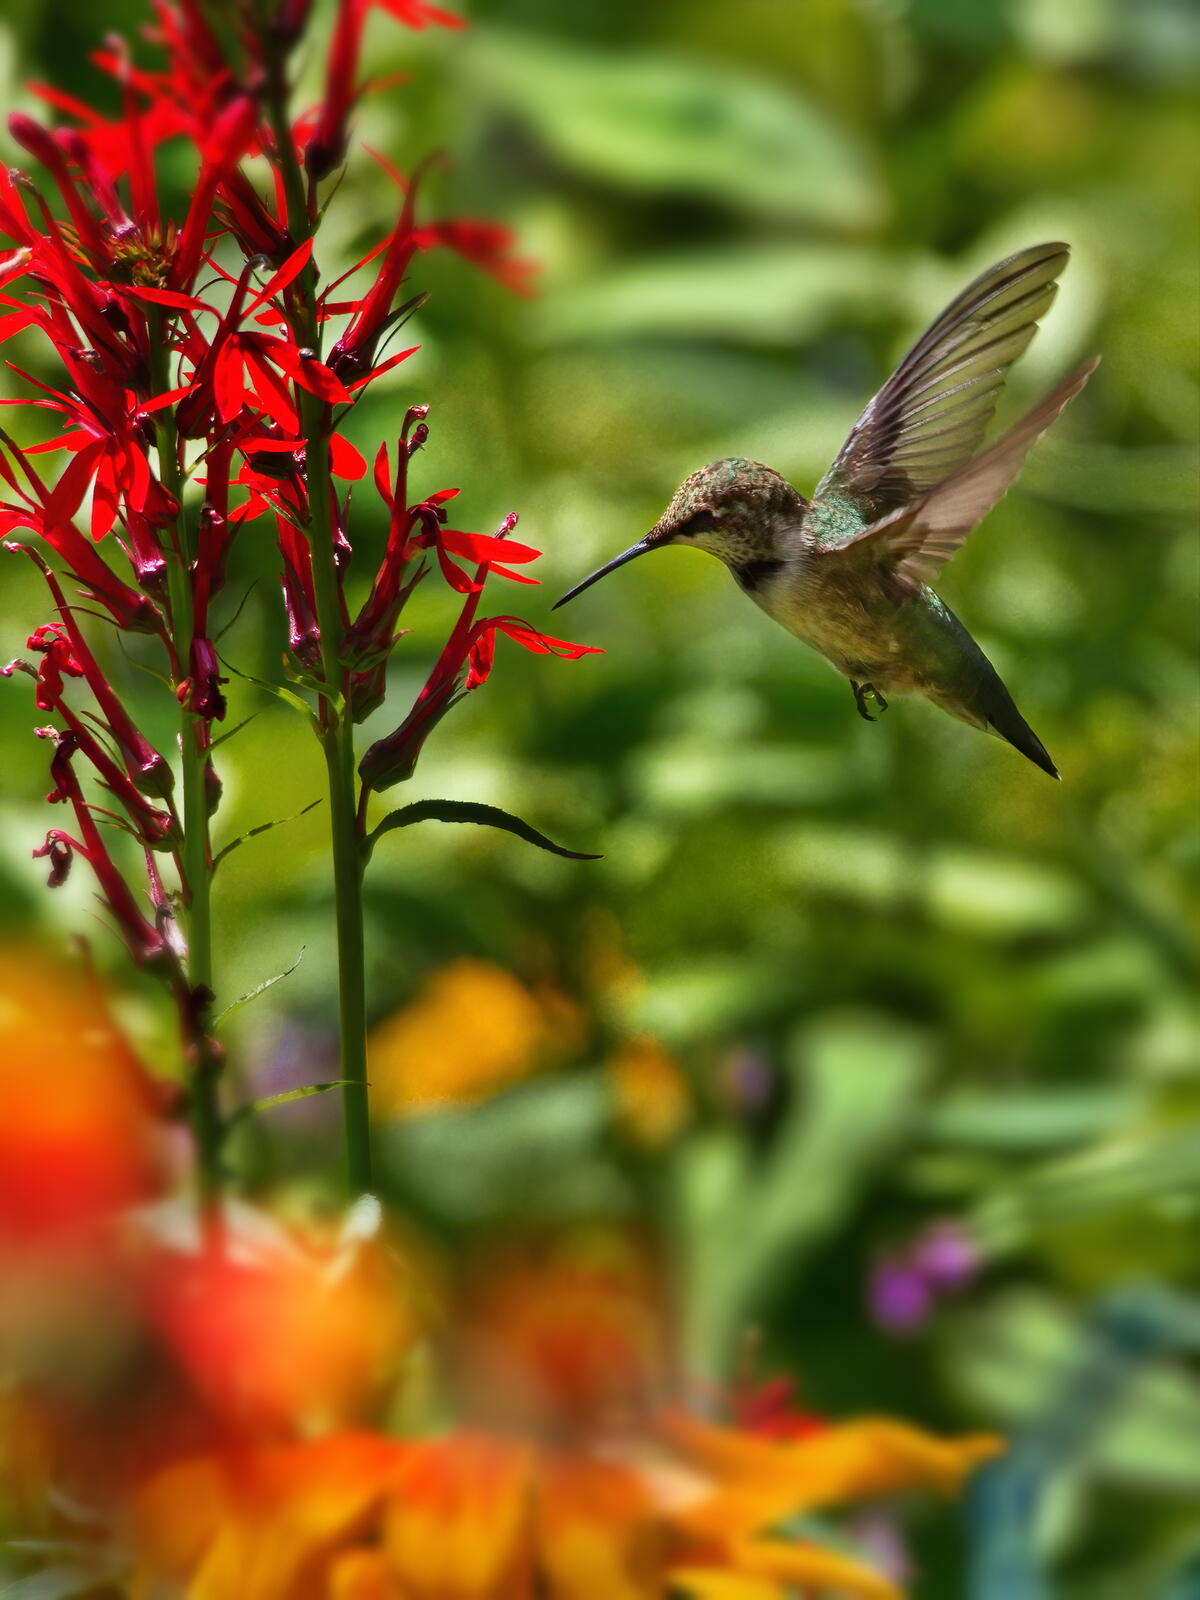 A hummingbird drinks nectar from a red flower